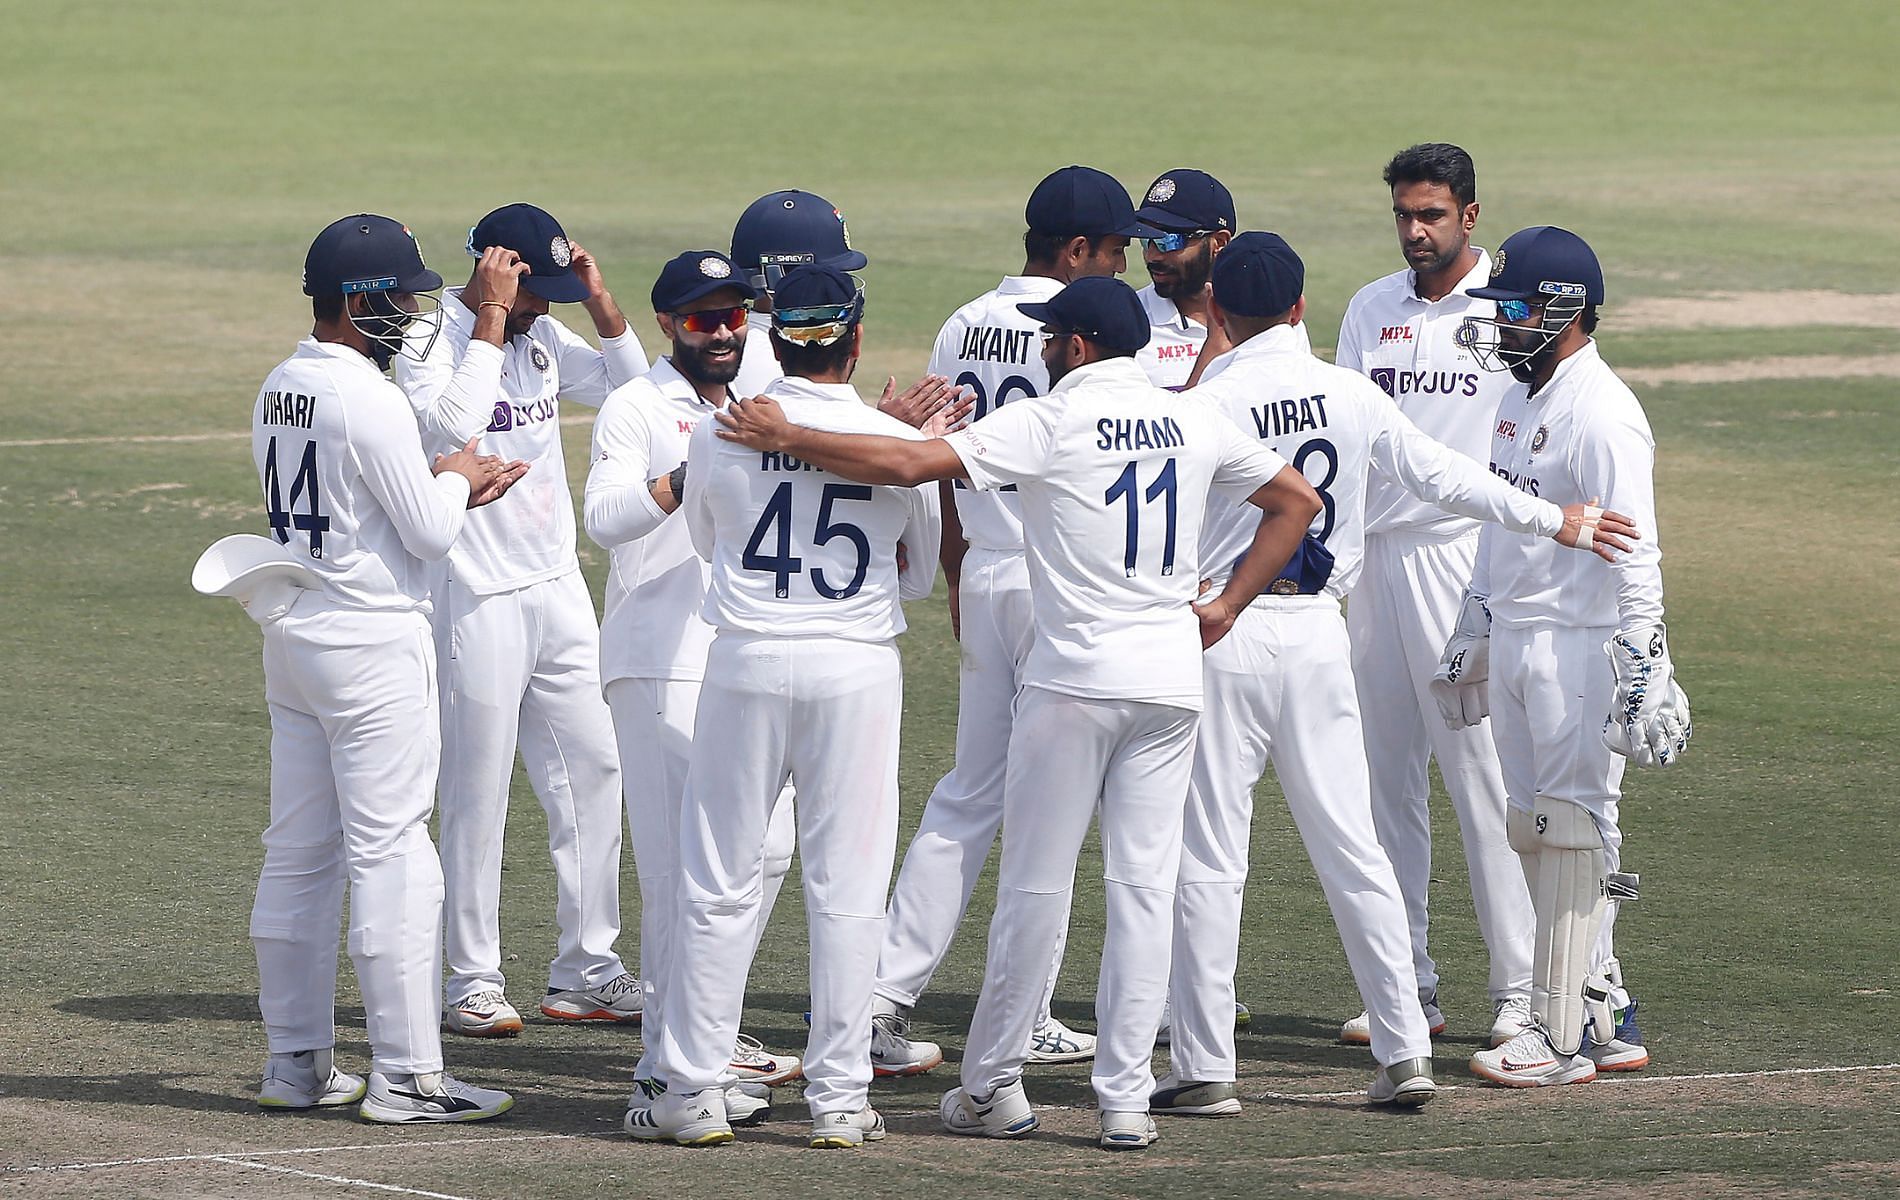 India have been one of the most dominant Test teams in recent years.